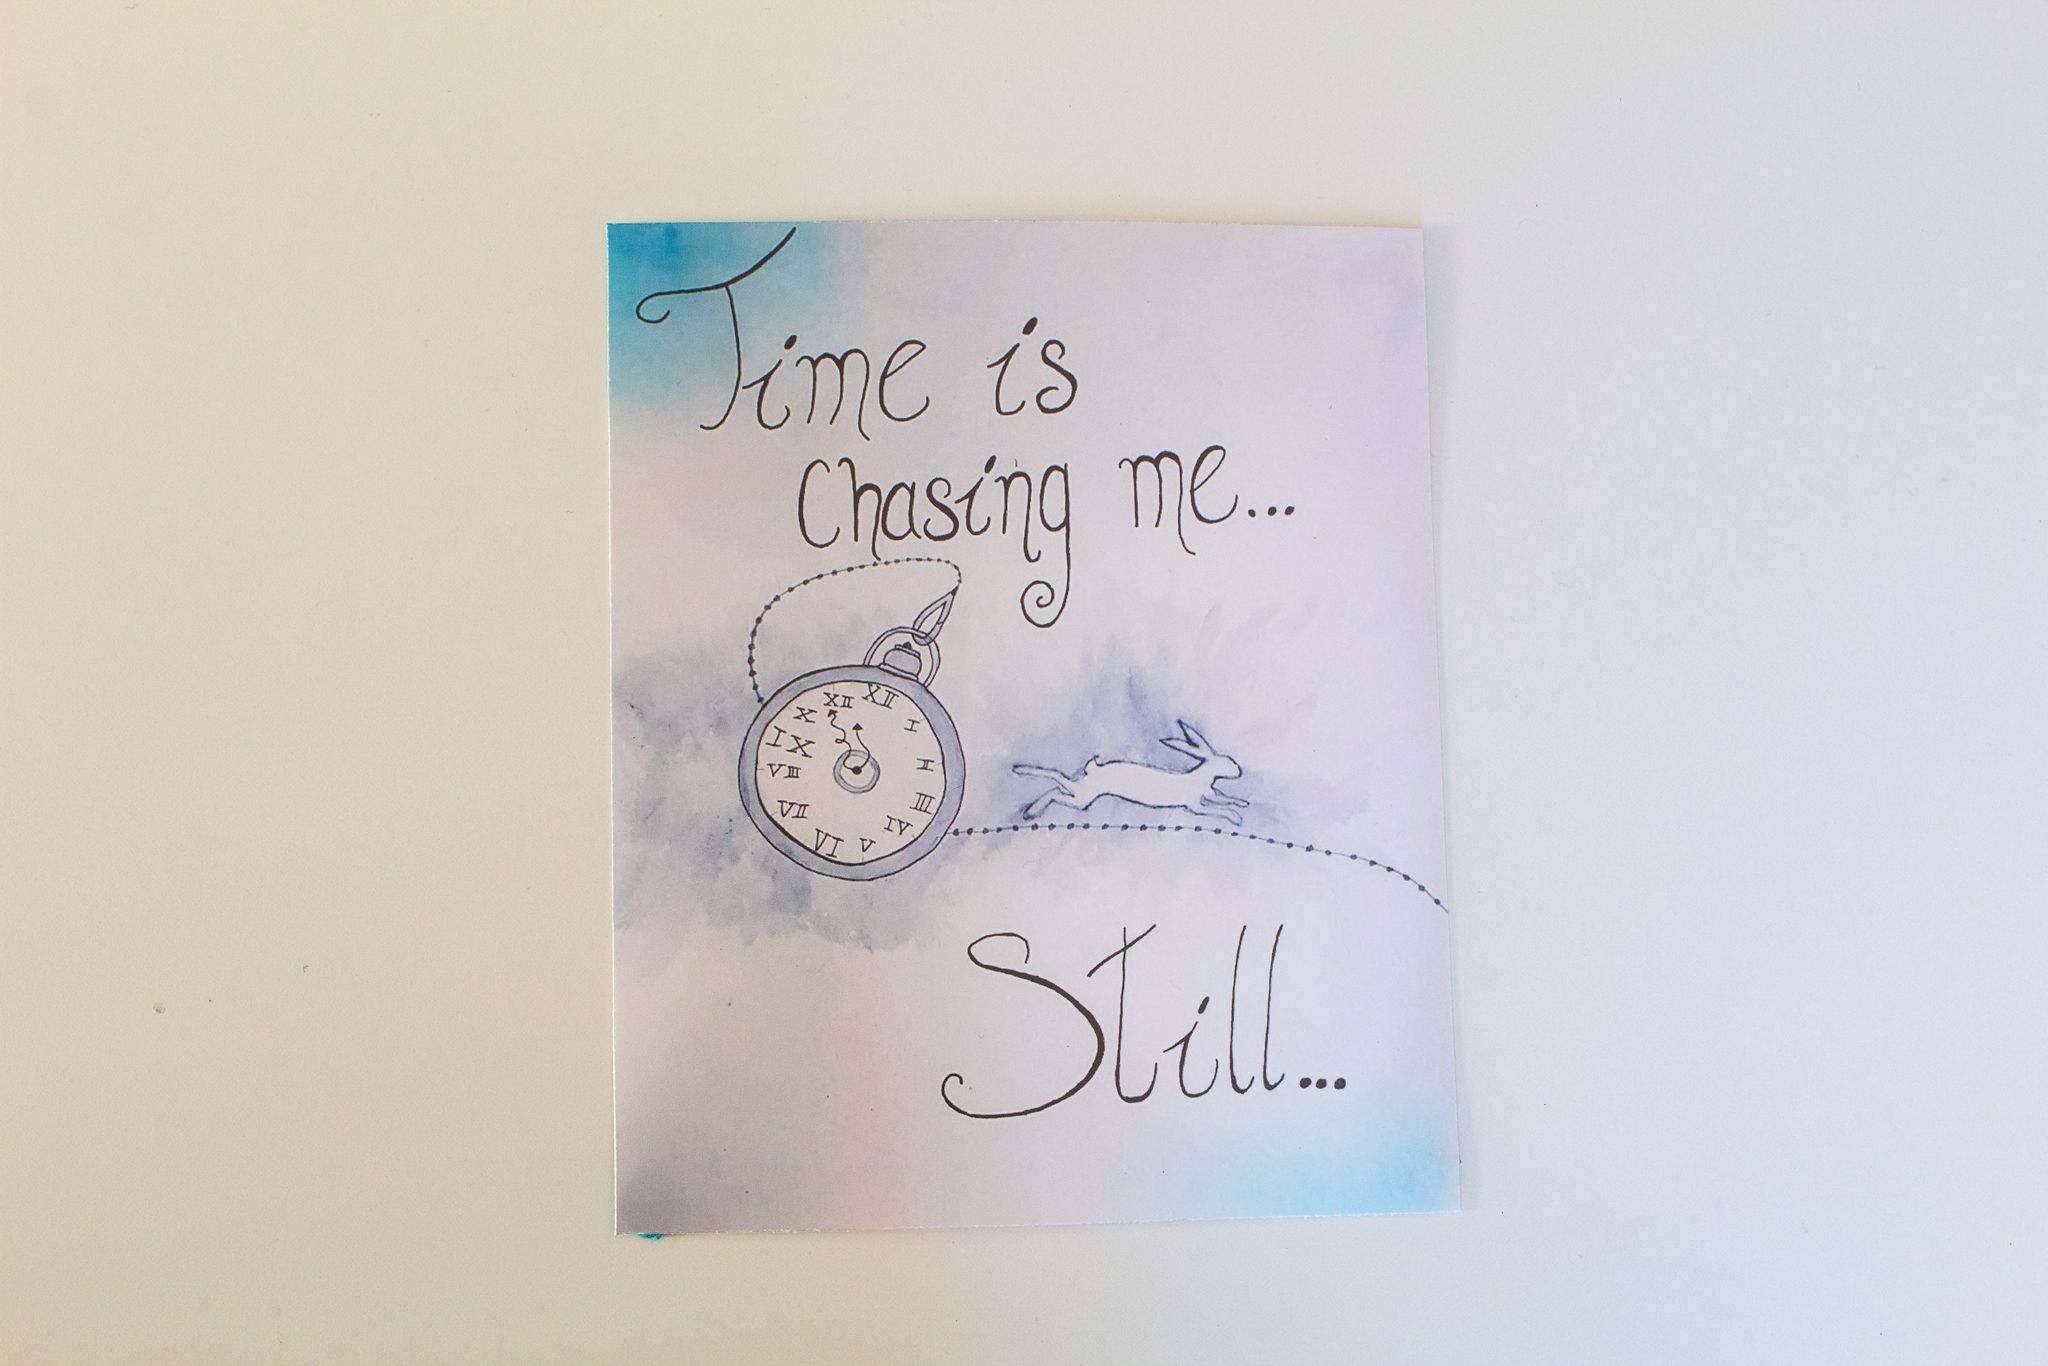 Product image of a print depicting a pocket watch and an outline of a white rabbit running away with the words "Time is Chasing me... Still", set on a cloudy white back ground with splashes of blue and grey